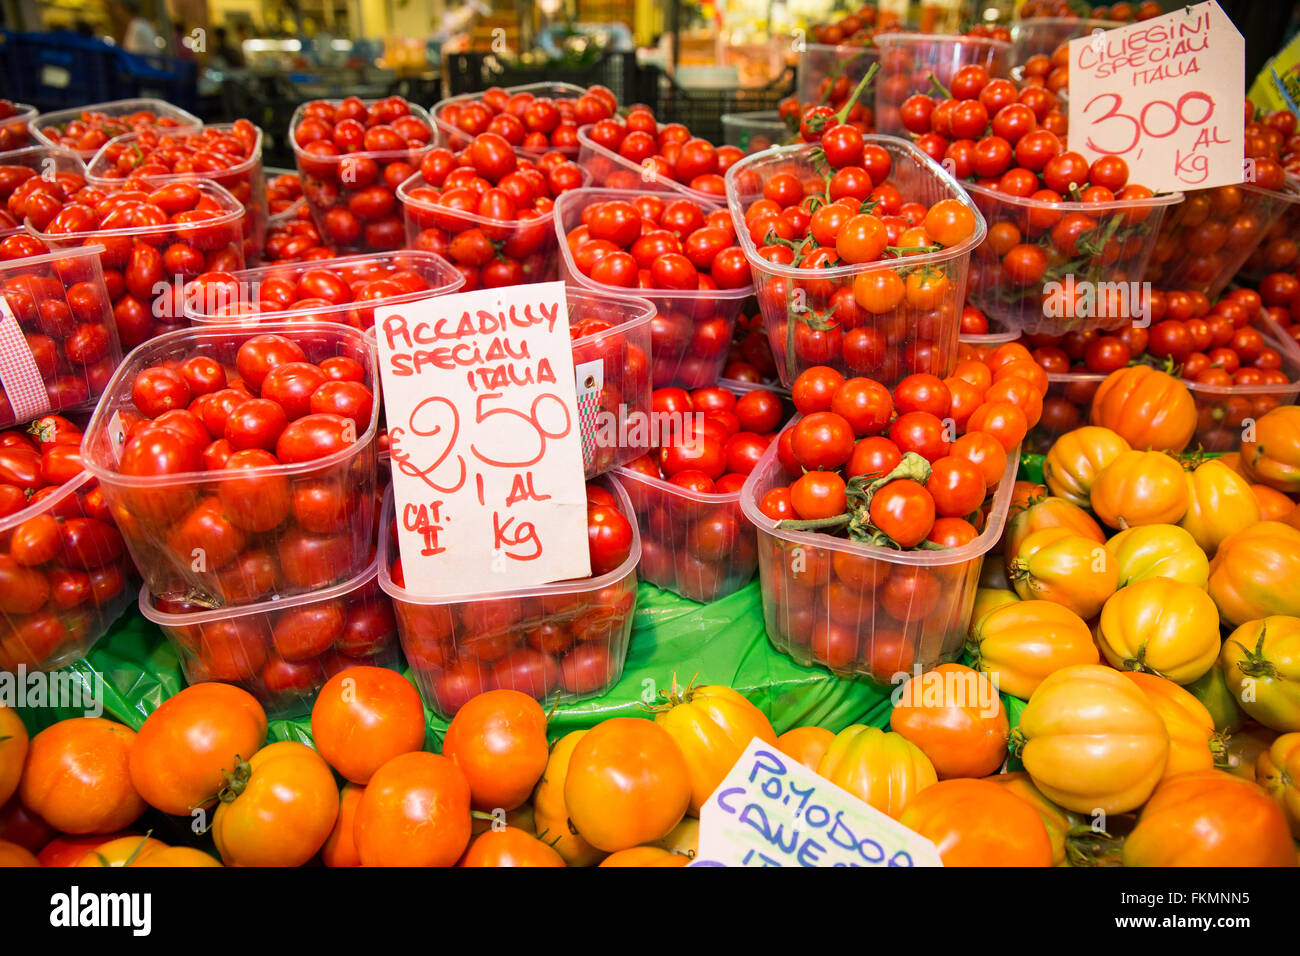 Fresh tomatoes for sale at a traditional Italian market.  Concepts could include food, health, culture, travel, and others. Stock Photo